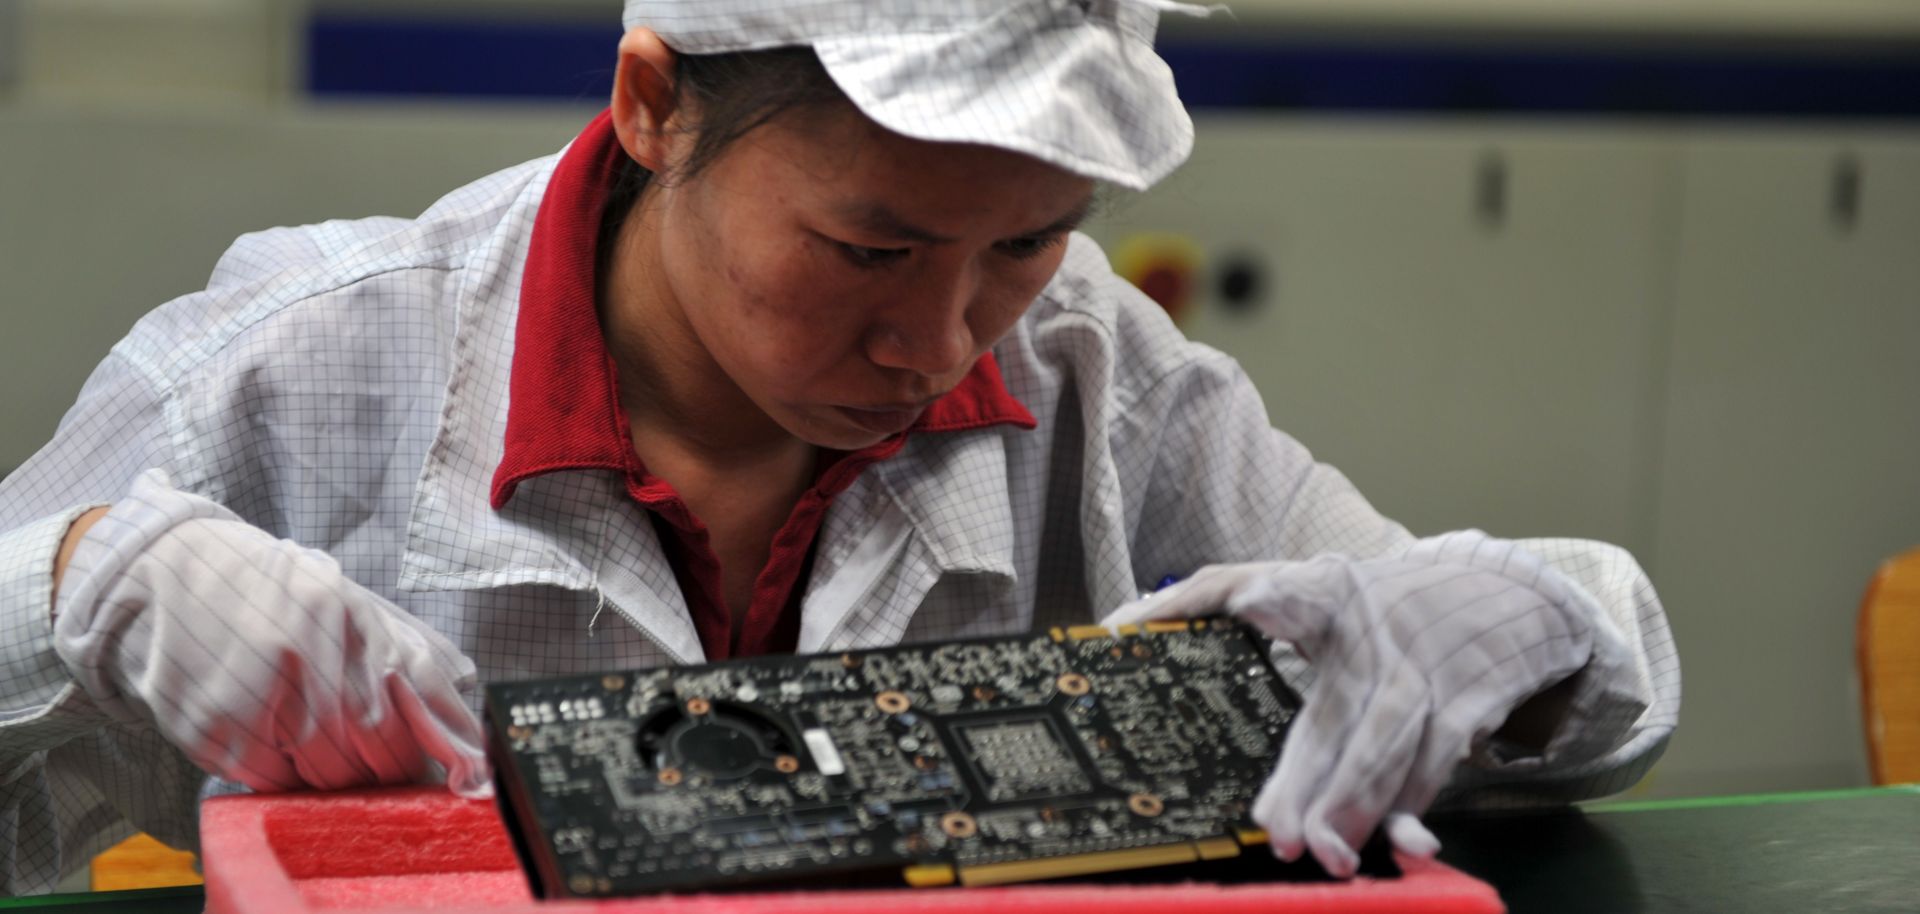 A worker inspects motherboards on a factory line at the Foxconn plant in Shenzhen, China, in 2010.